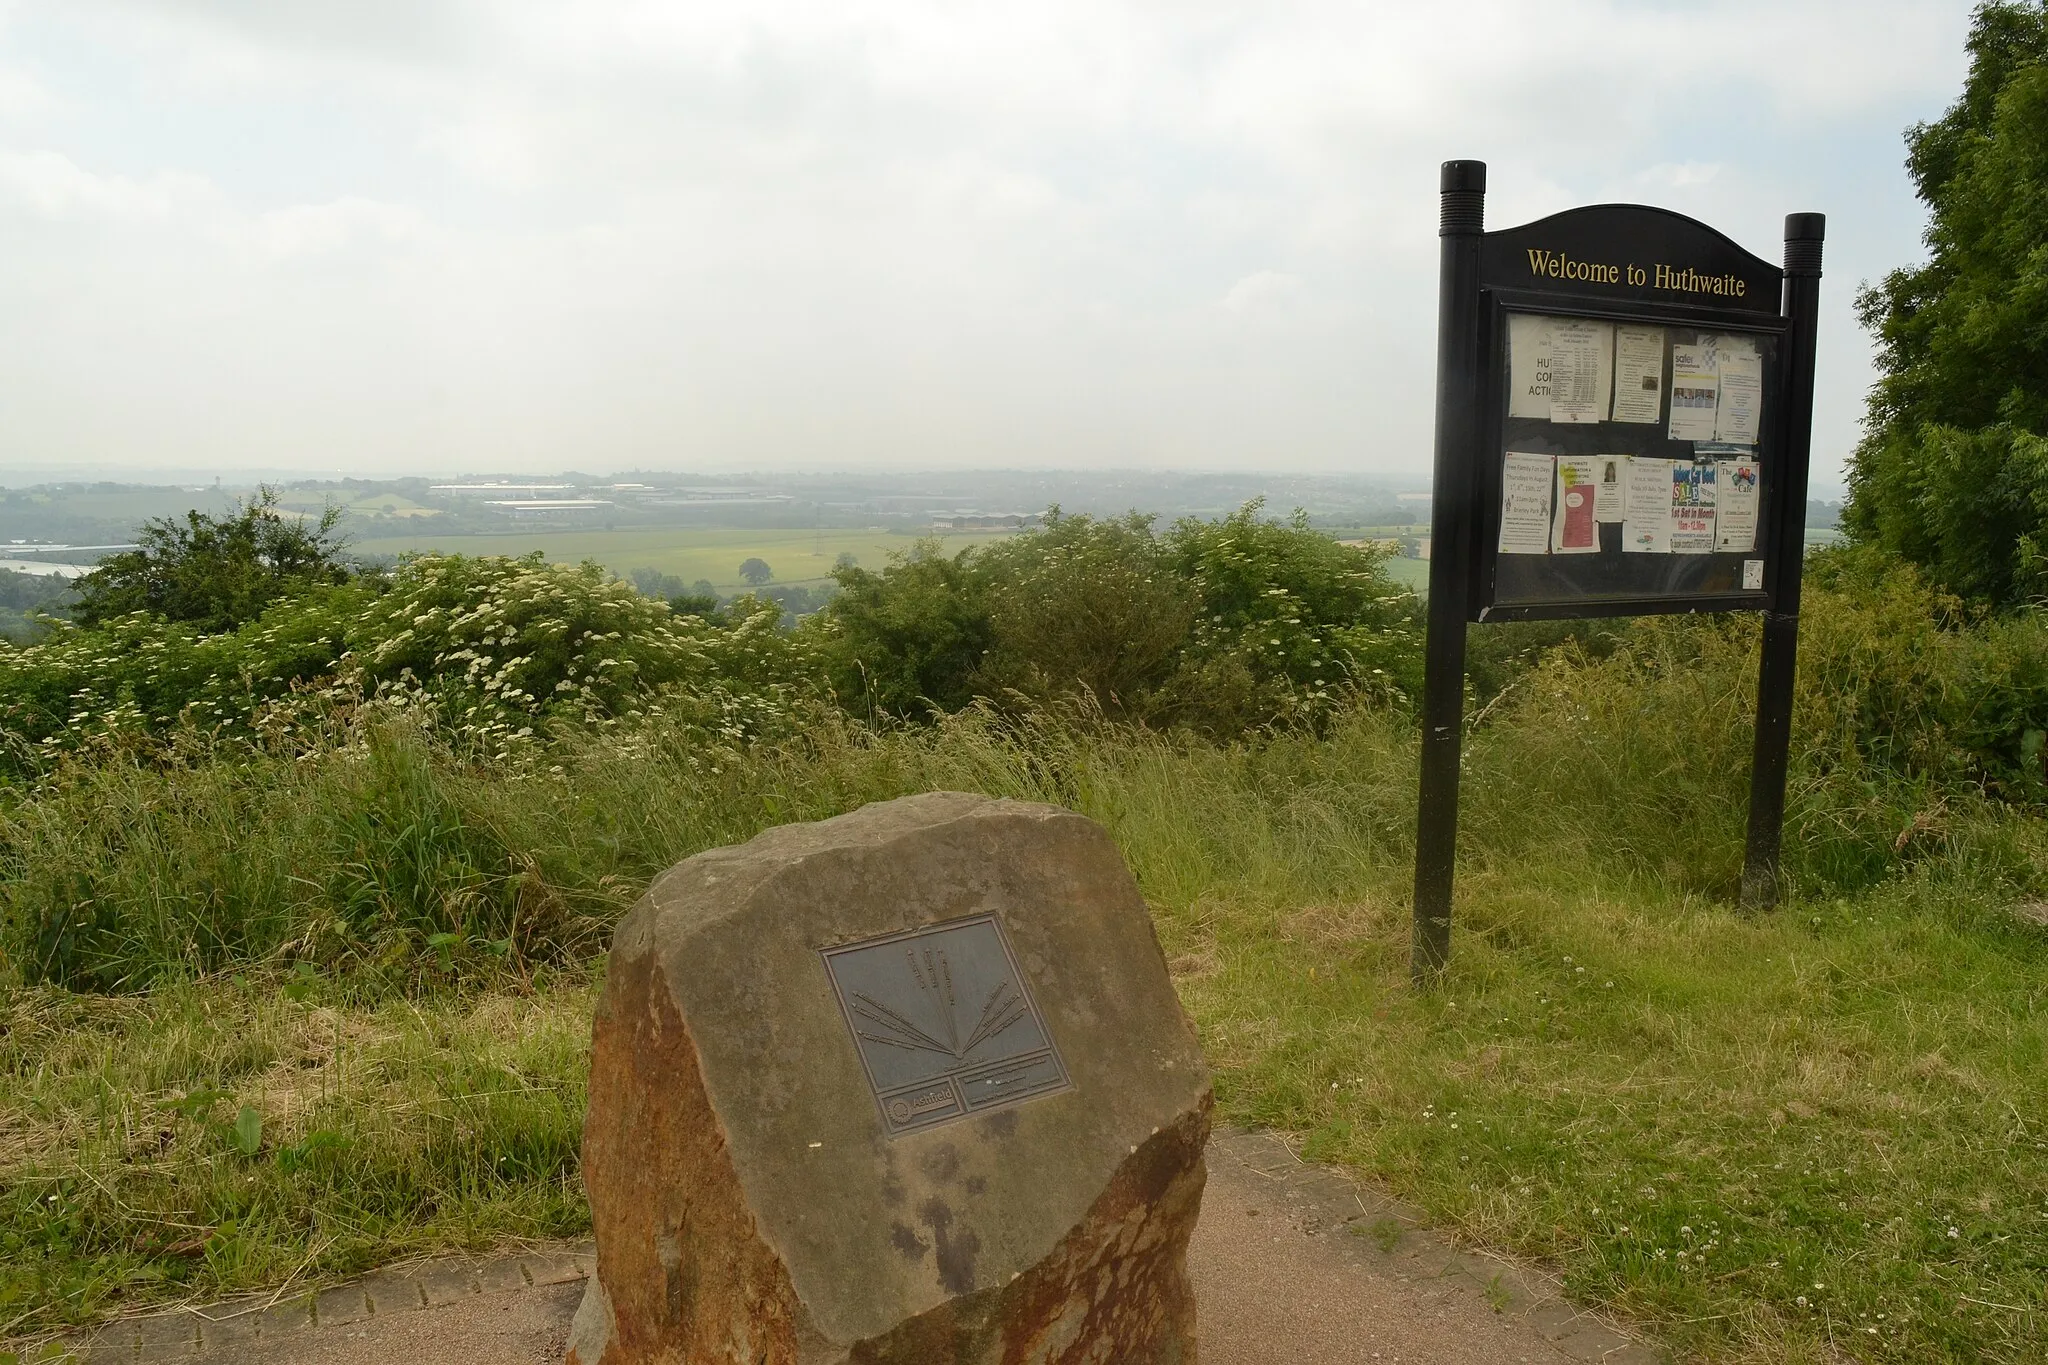 Photo showing: Strawberry Bank -The plaque claims this to be the highest natural point in Nottinghamshire, at 201 metres or 660 feet above sea level